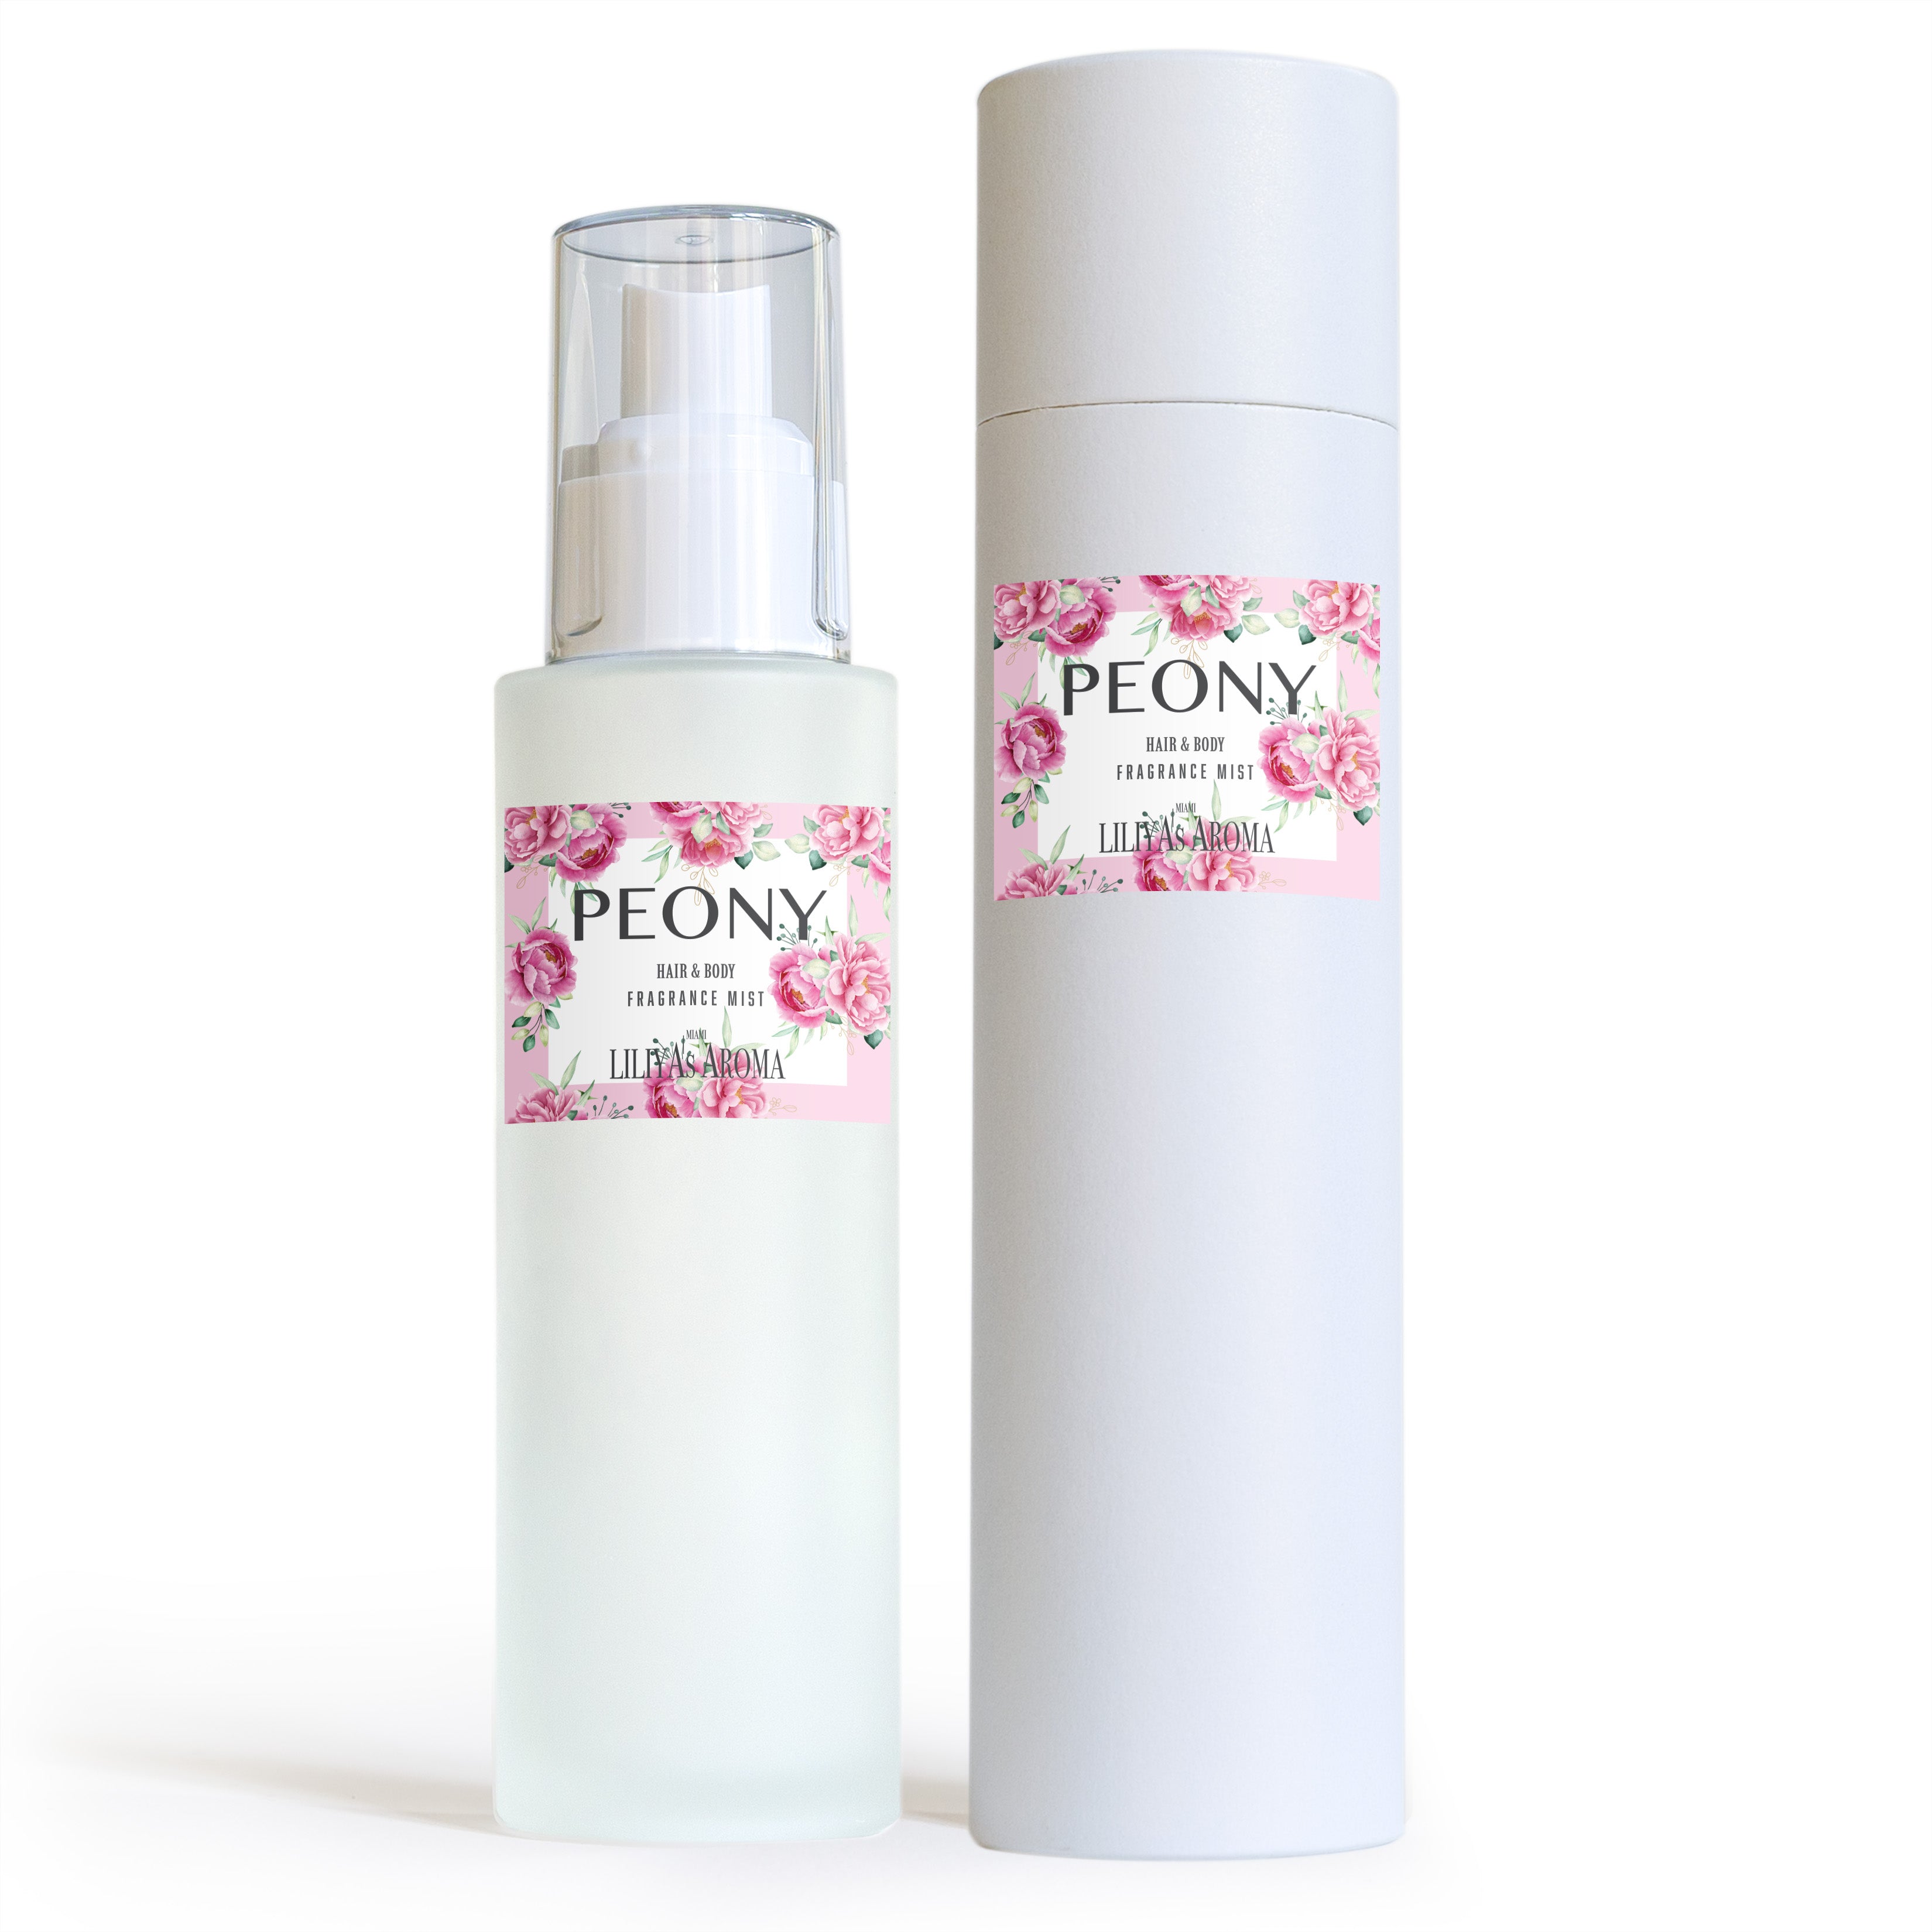 Peony perfume for body and hair